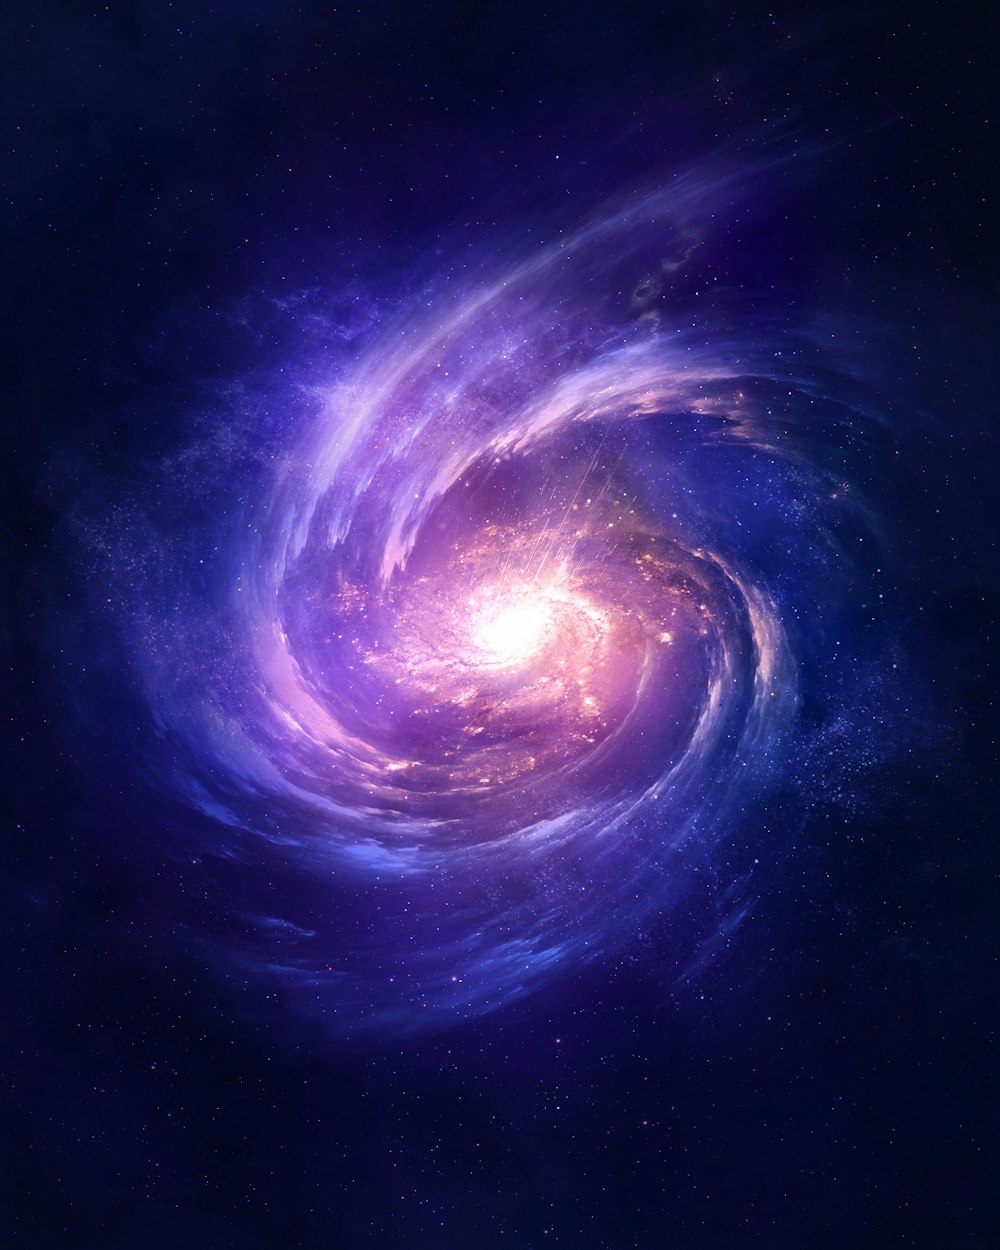 a purple and blue spiral shaped object with stars in the background